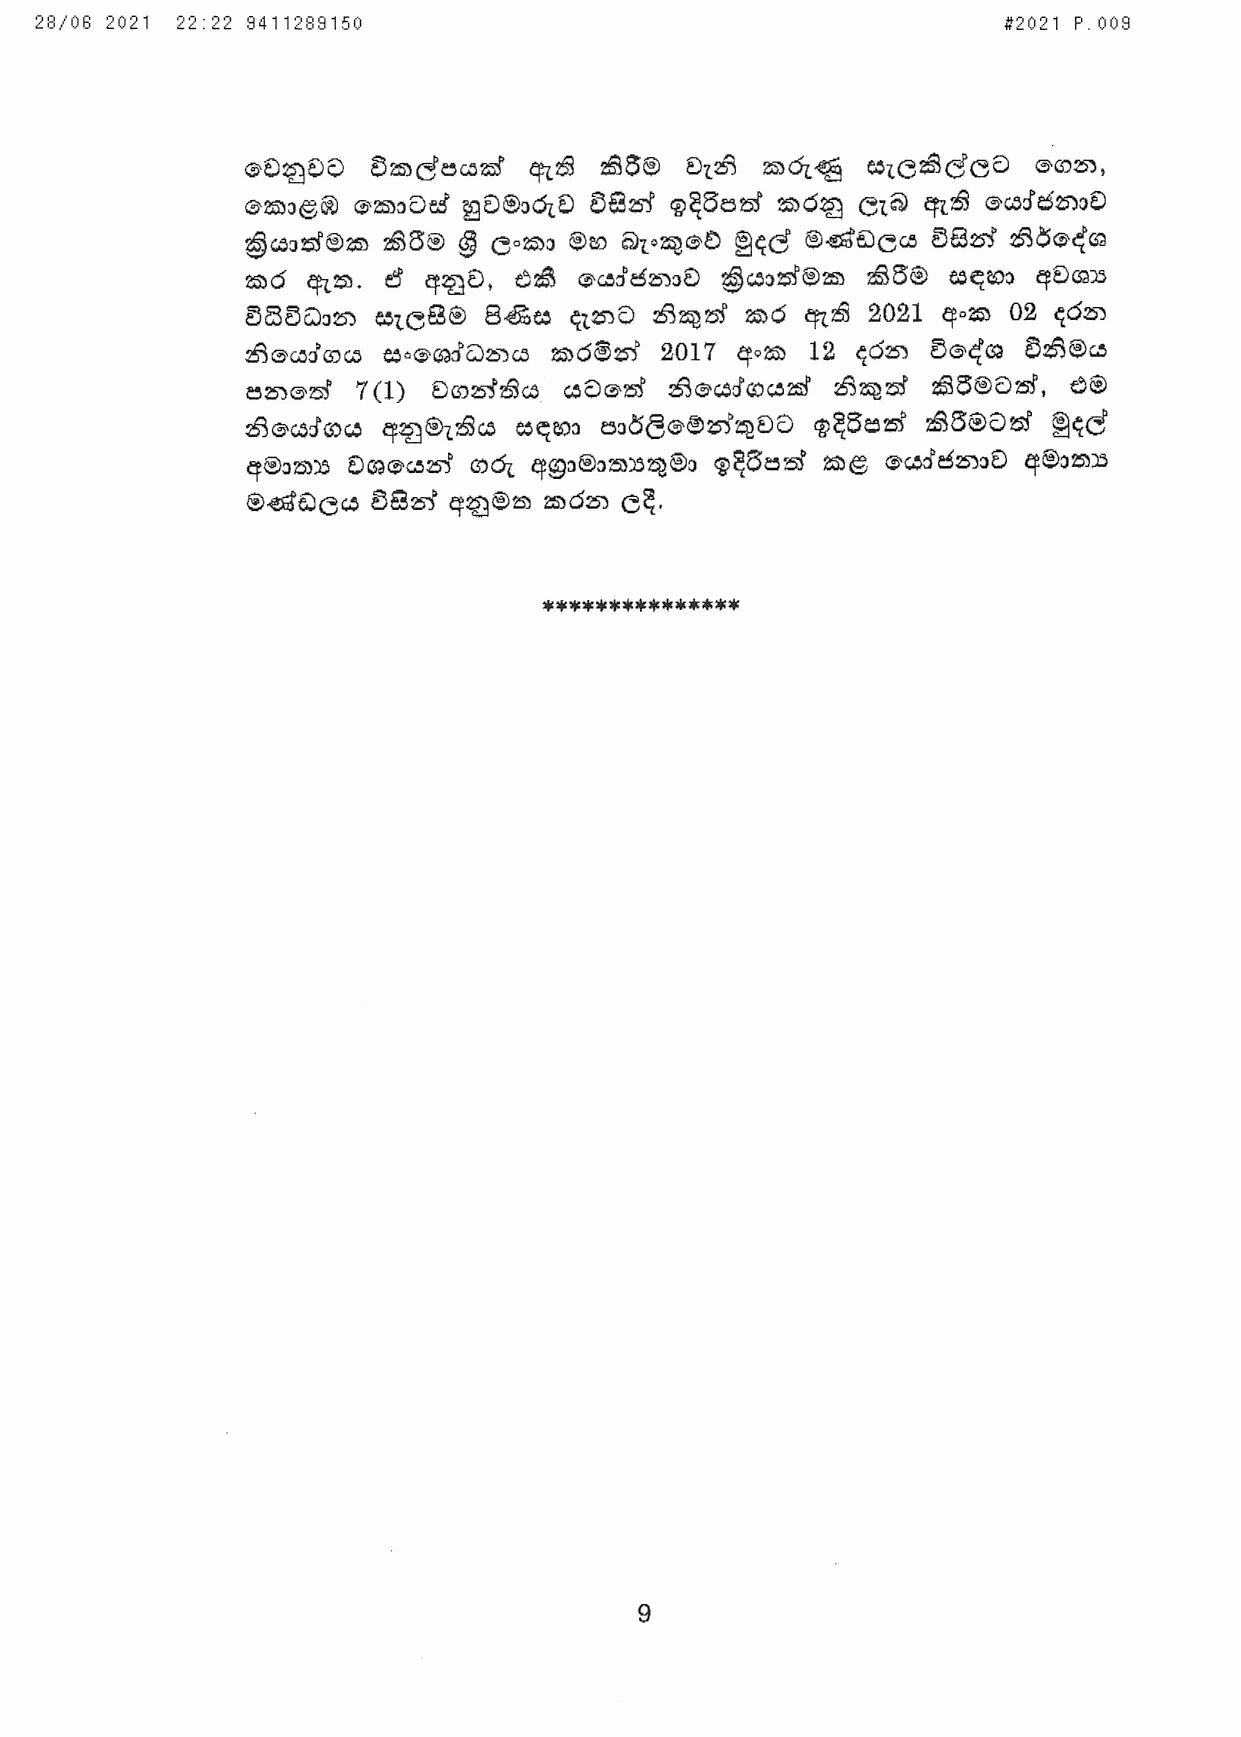 Cabinet Decision on 28.06.2021 page 009